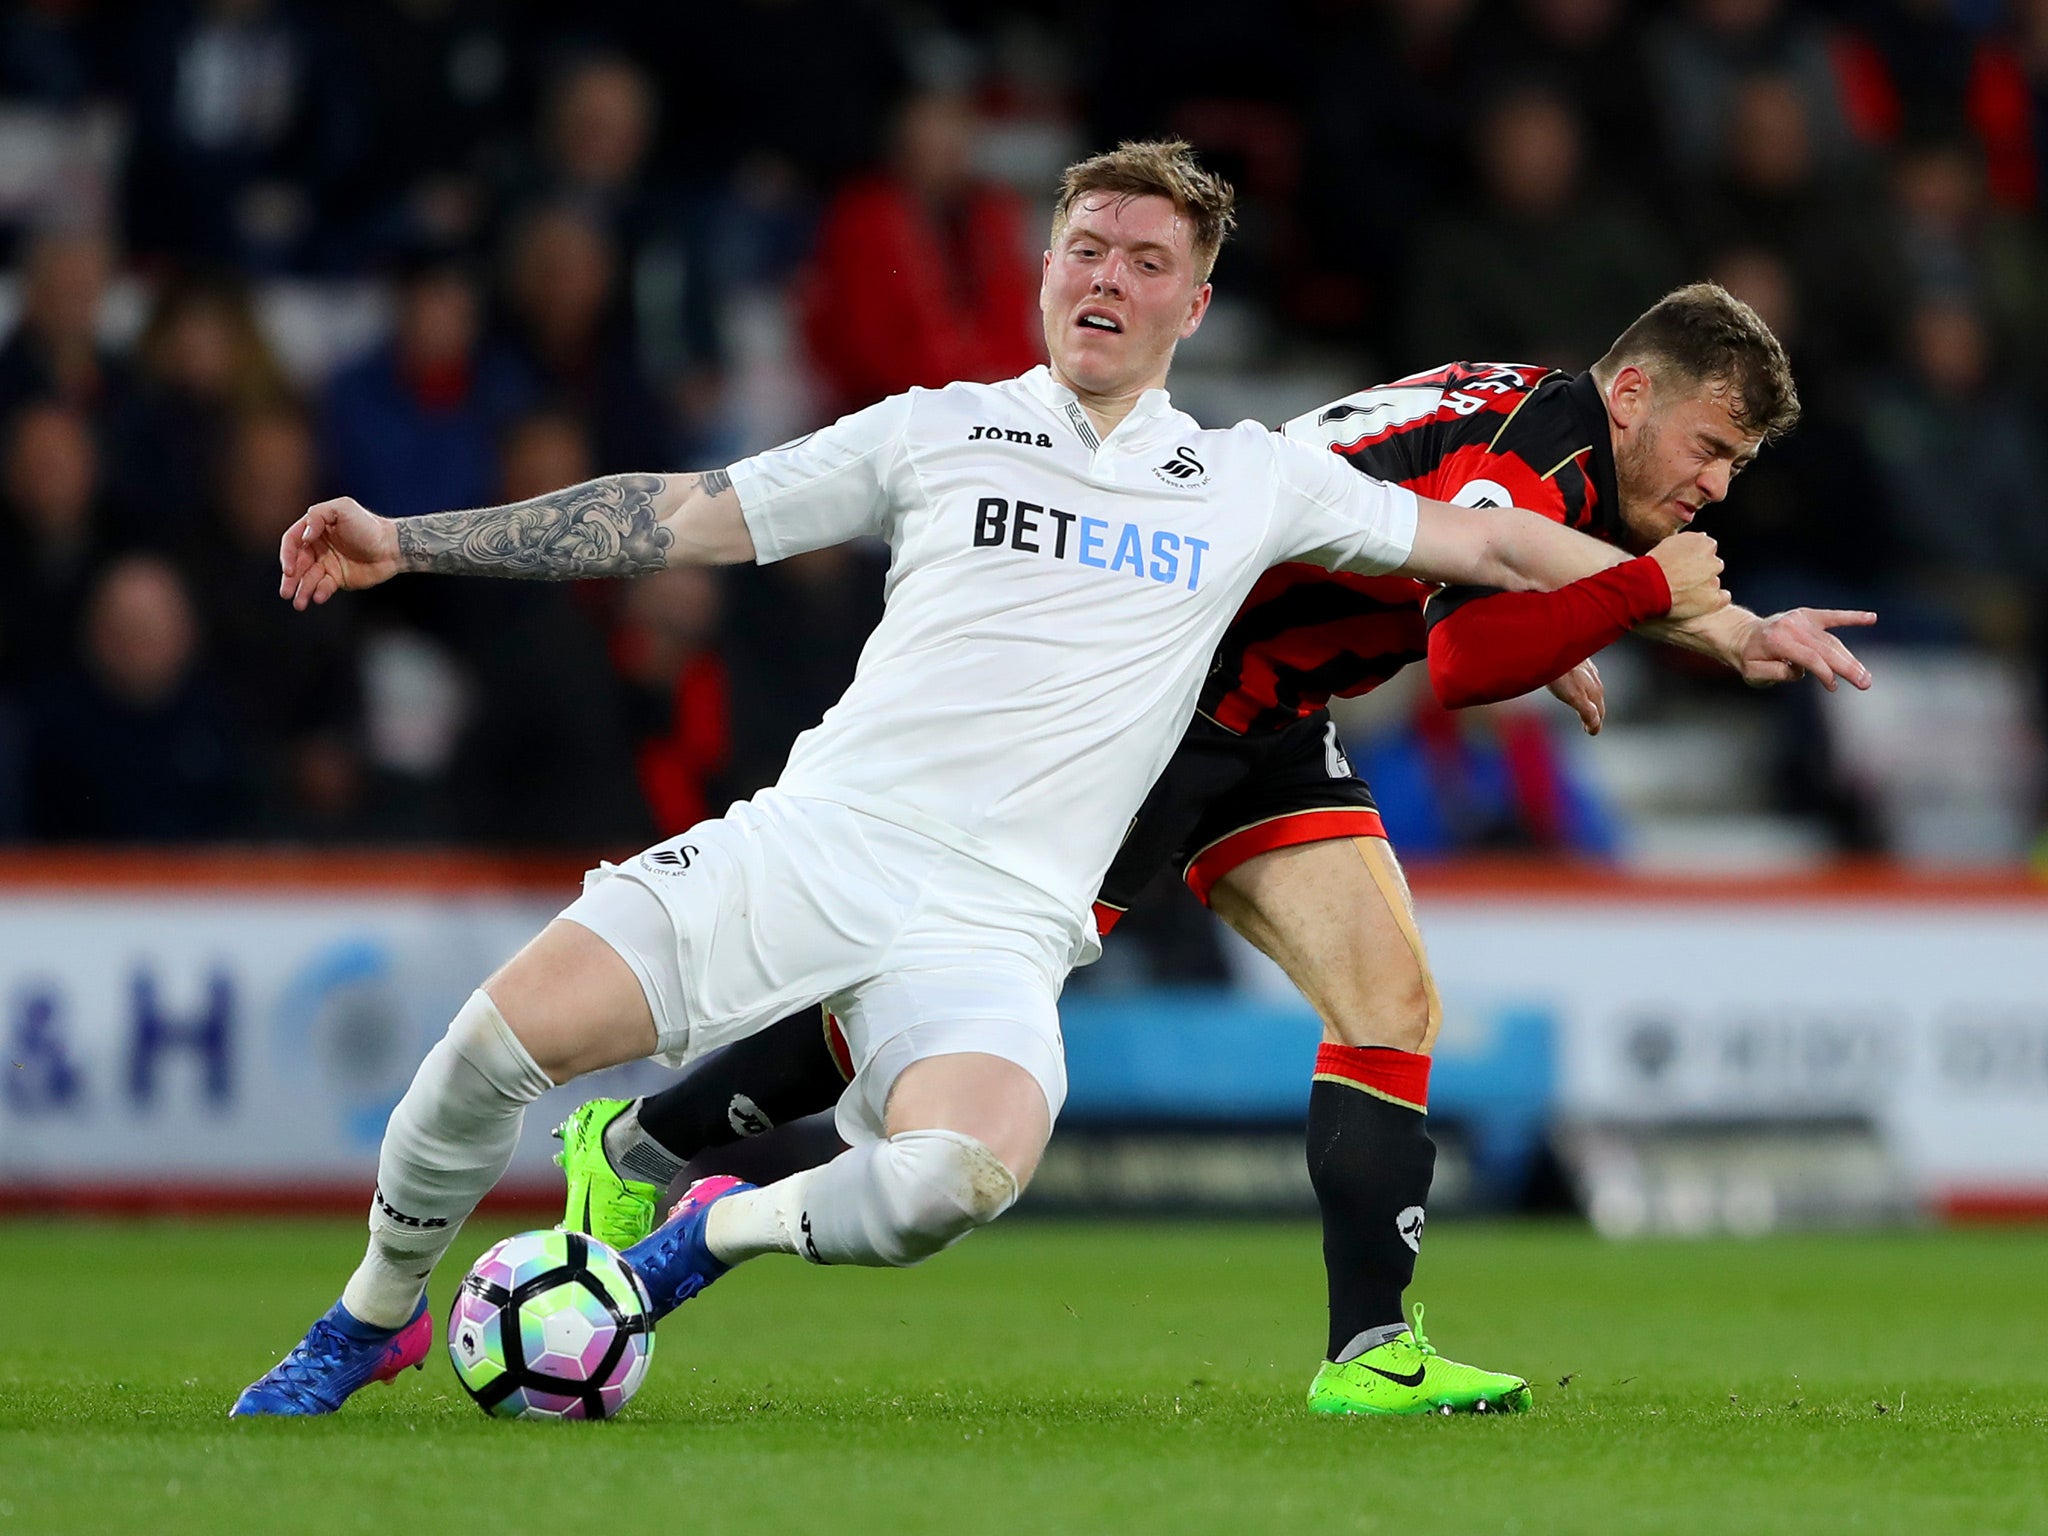 Alfie Mawson has proved effective at both ends since his debut